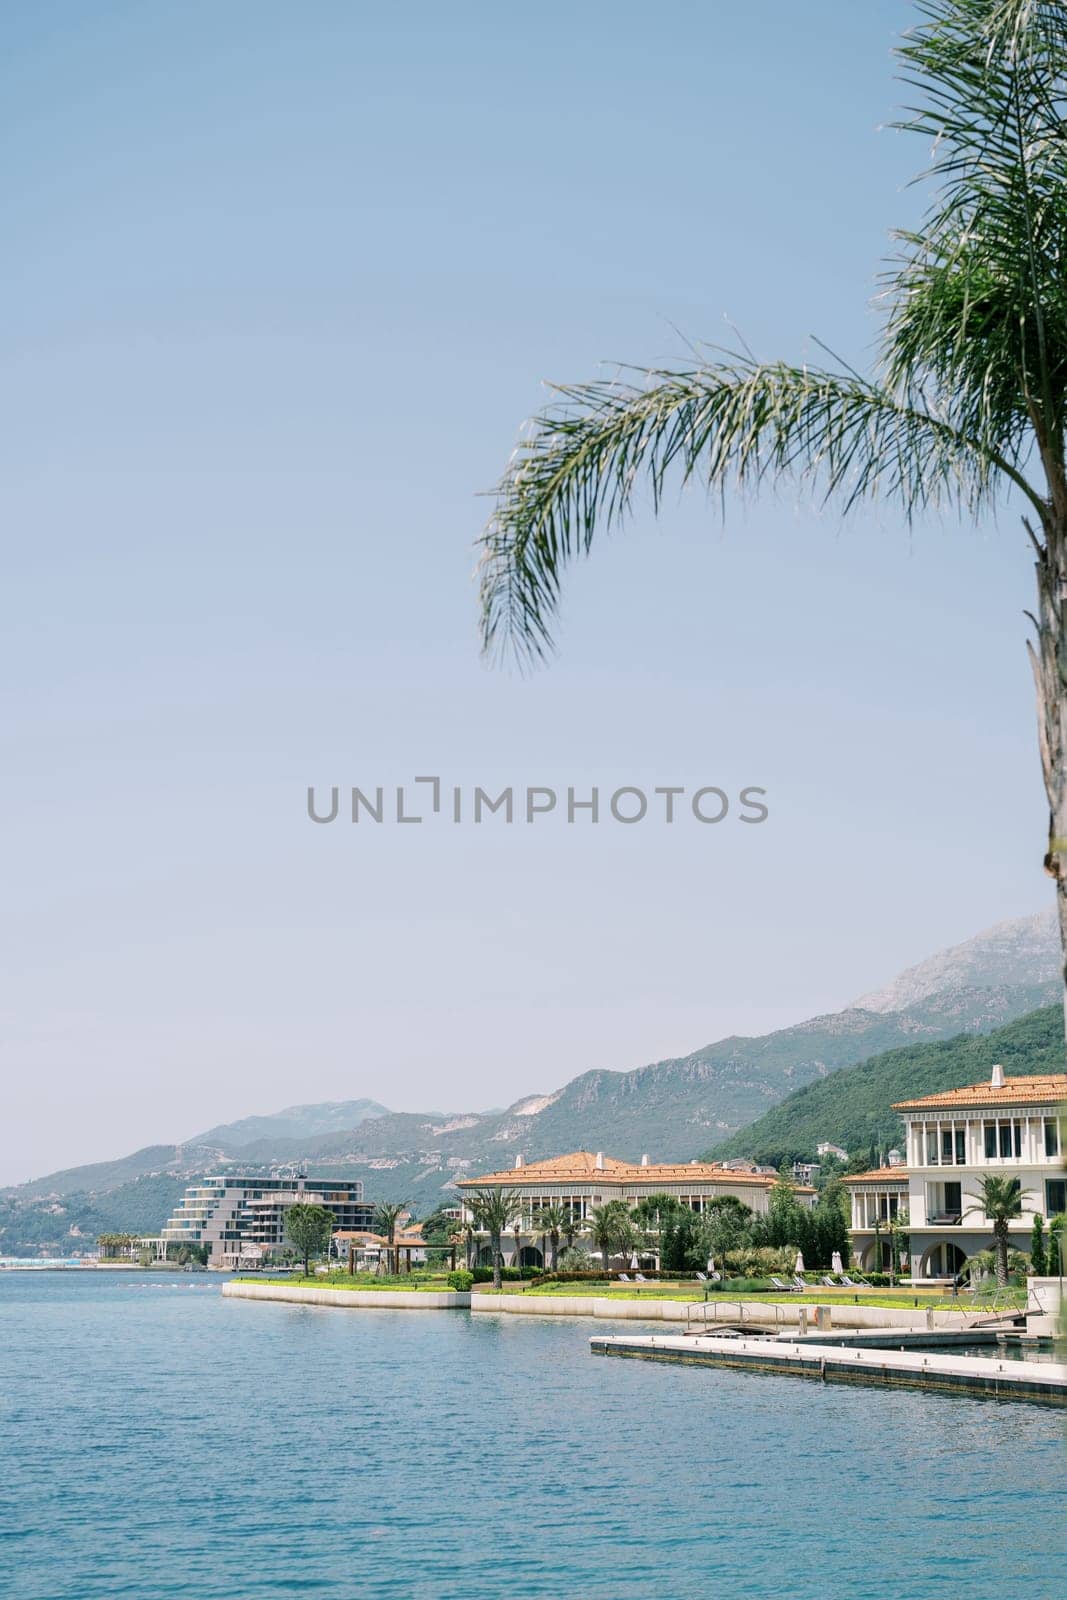 One and Only hotel complex on the seashore at the foot of the mountains. Portonovi, Montenegro. High quality photo